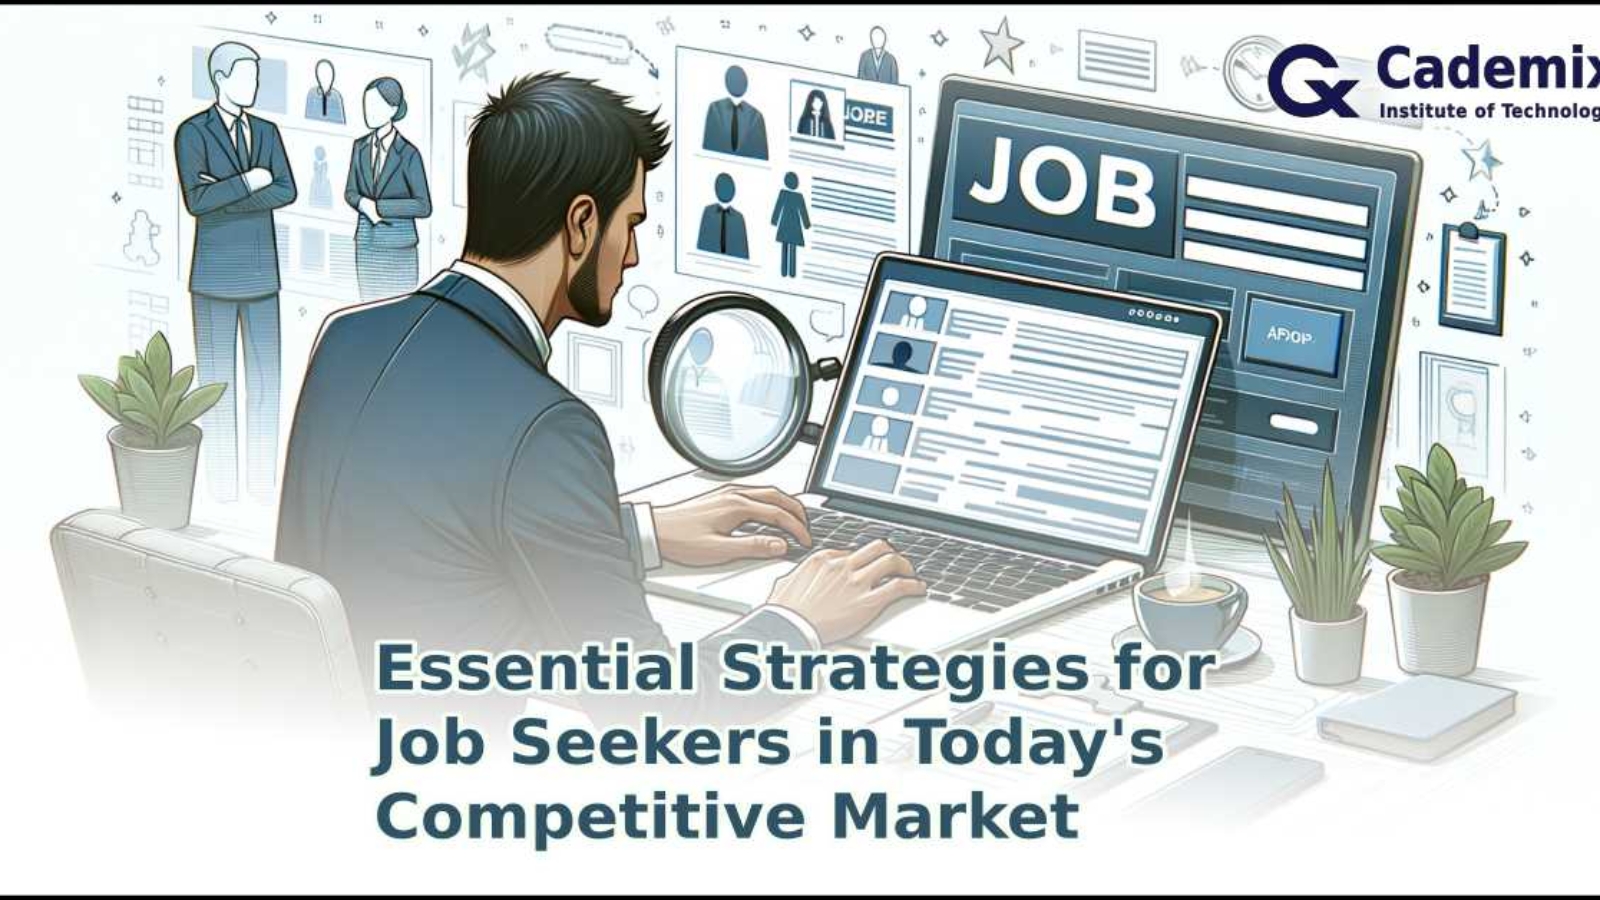 Essential Strategies for Job Seekers in Todays Competitive Market